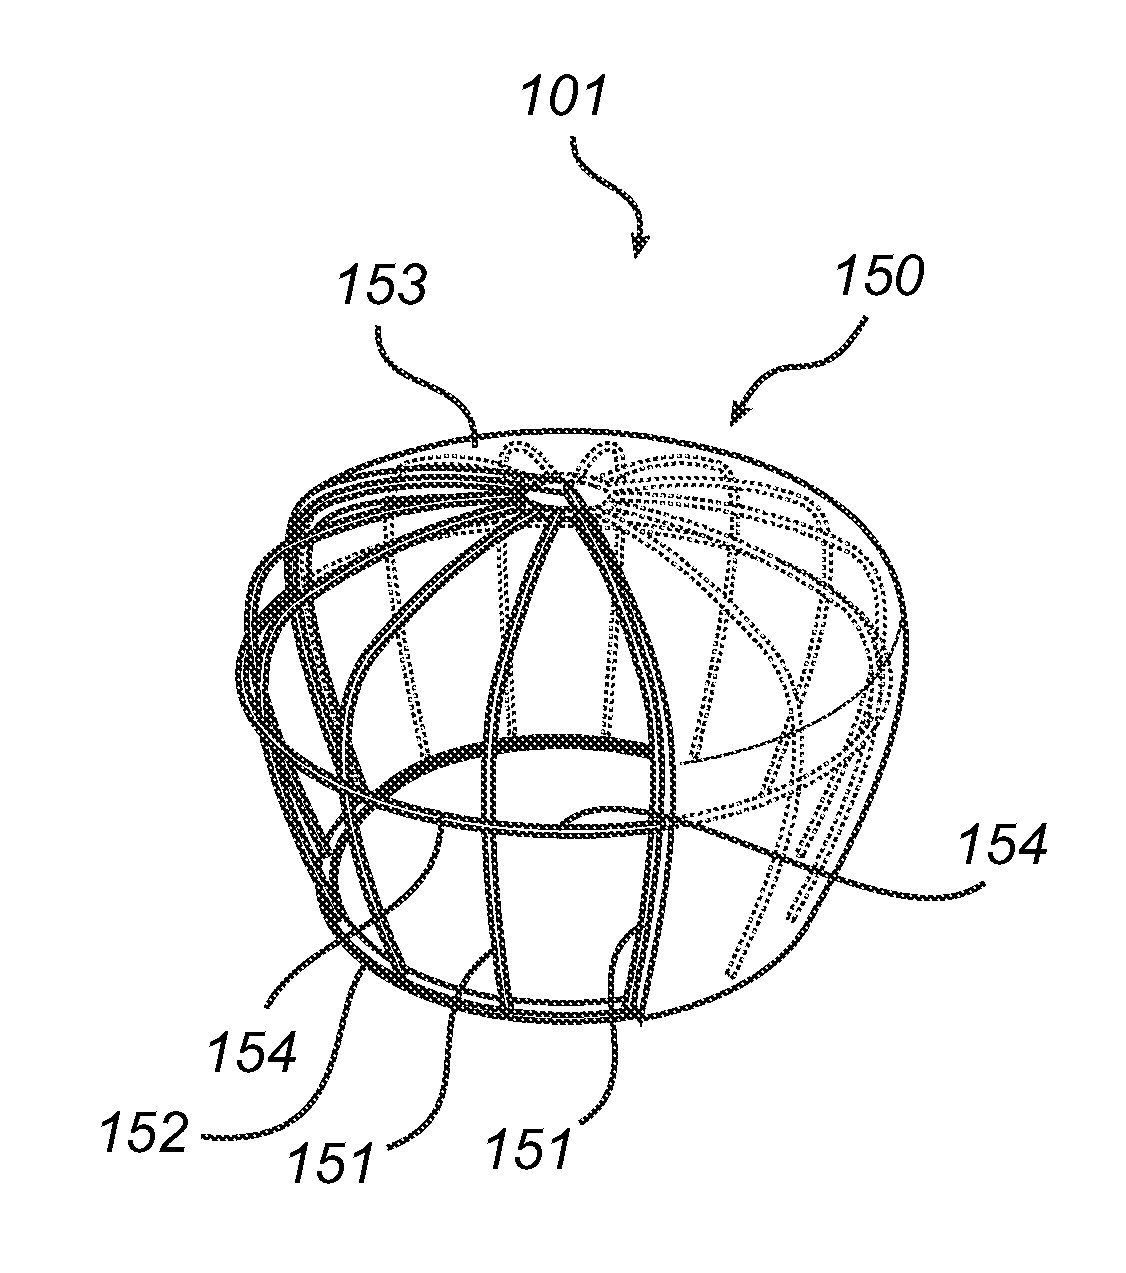 Lighting device with integrated lens heat sink